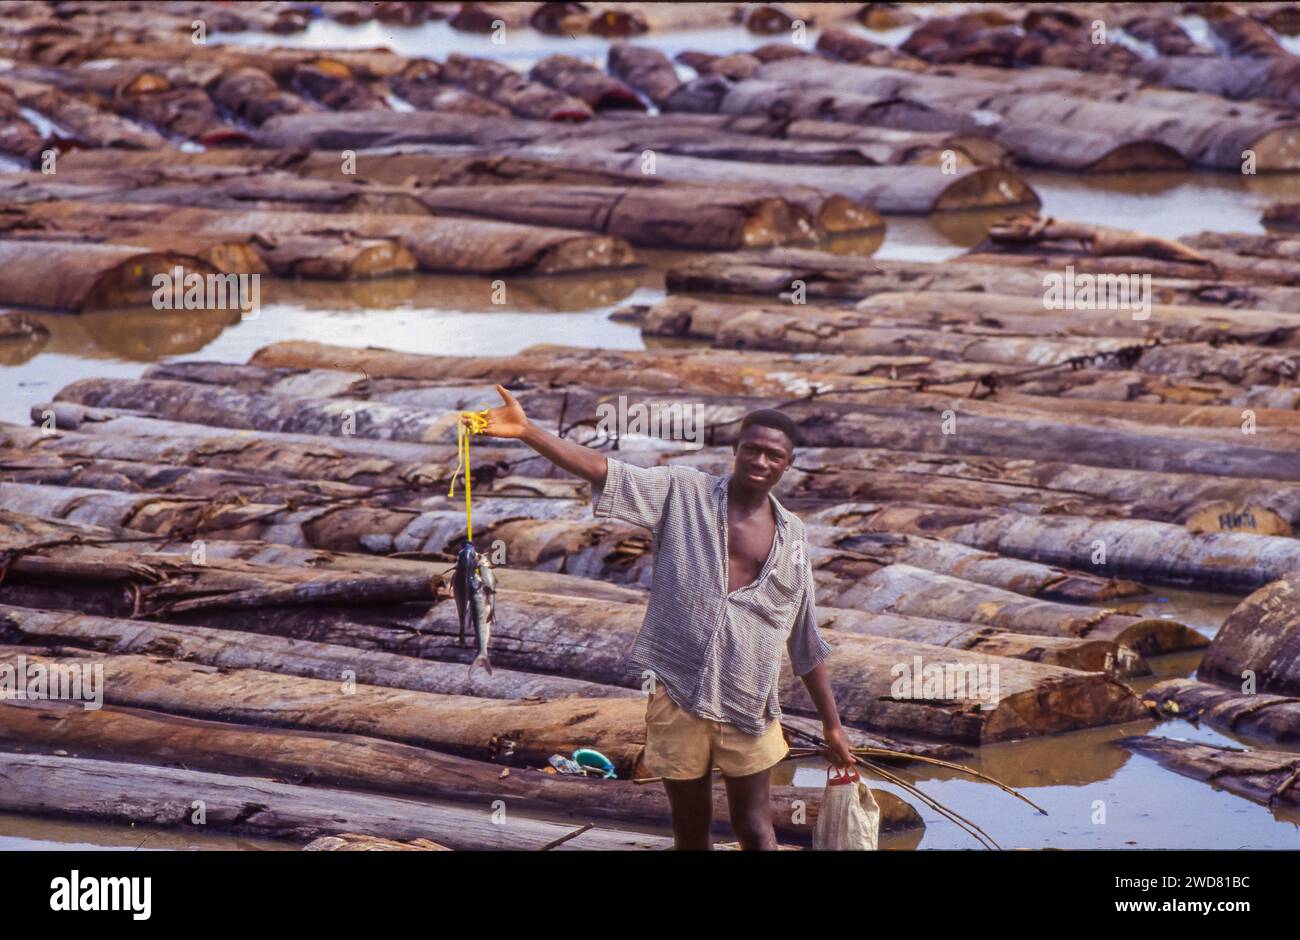 Ivory Coast, Abidjan; Fisher has caught a fish between the logs of wood in the Banco Bay water. The logs are ready for export. Stock Photo